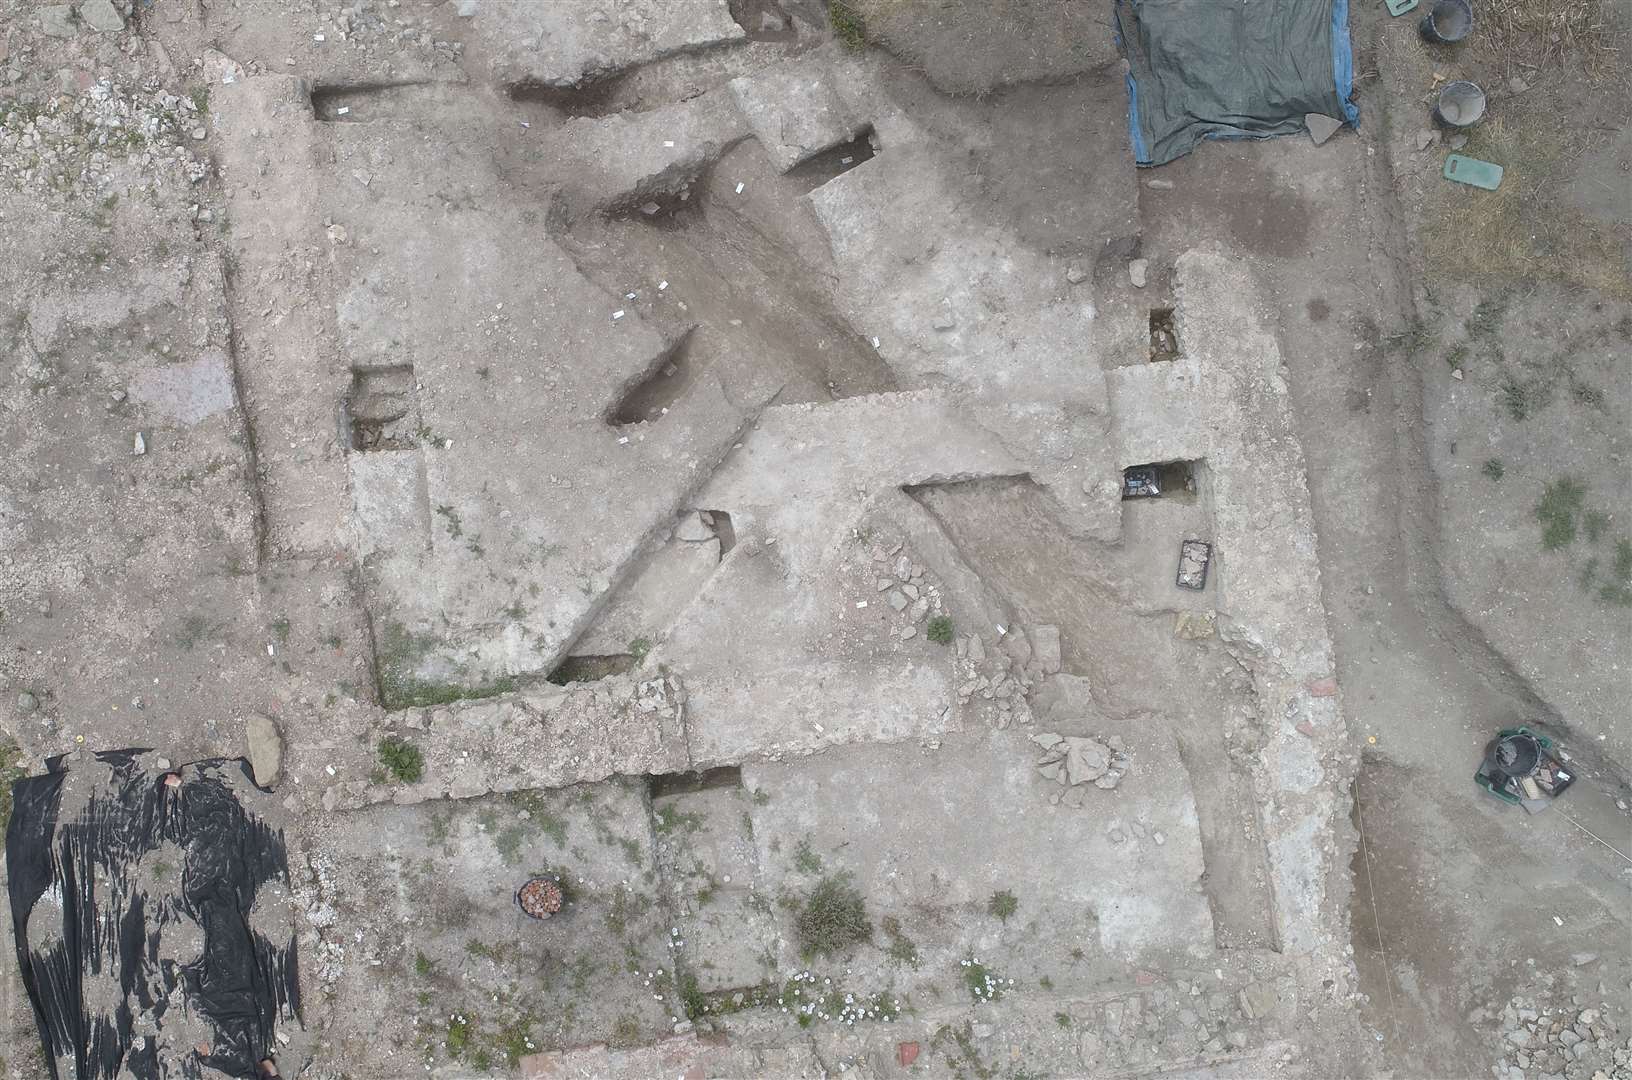 Aireal view of the Roman villa and bathhouse at Otford